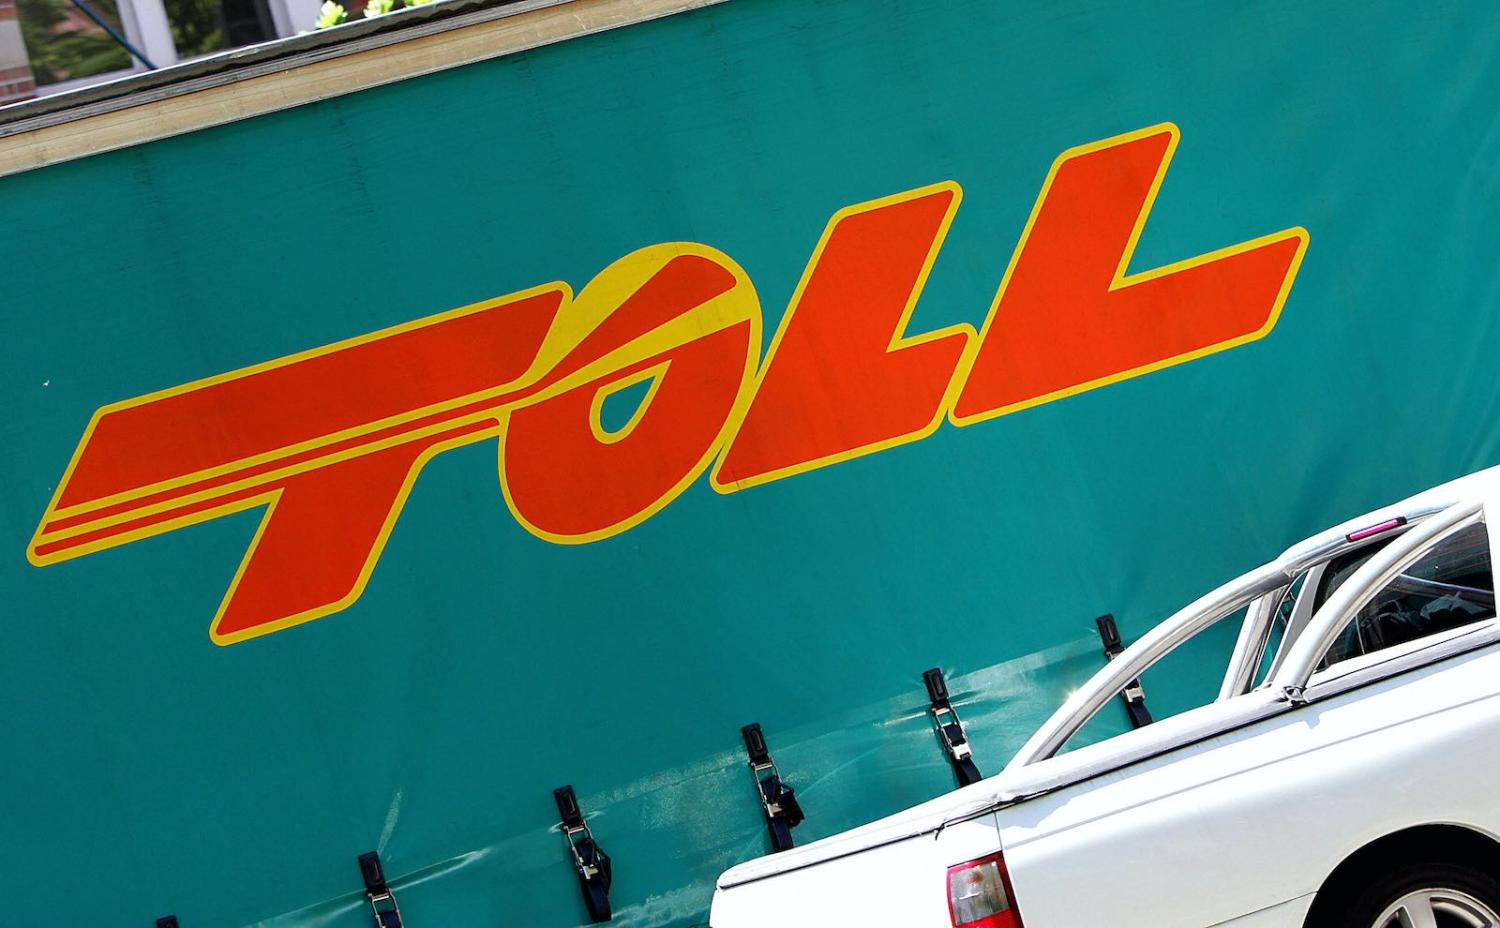 Japan Post has already written off $4.9 billion of its original purchase price of Toll Group (Greg Wood/AFP via Getty Images)